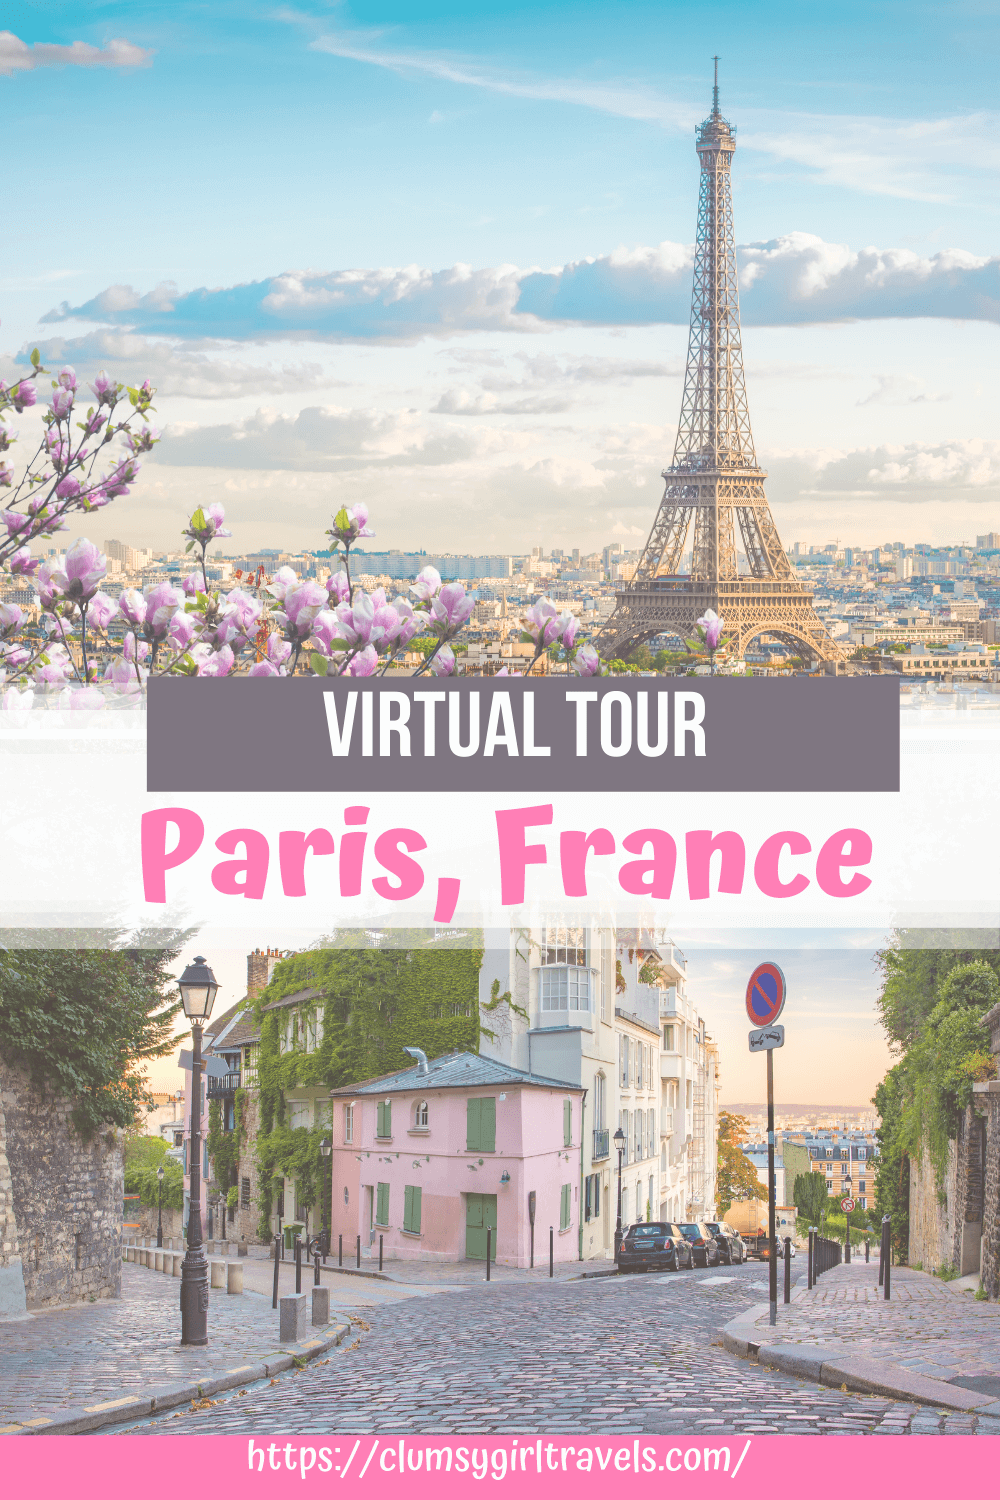 This virtual tour of Paris will take you around the city of lights through food, culture and so much more! You won't want to miss this virtual Paris tour.